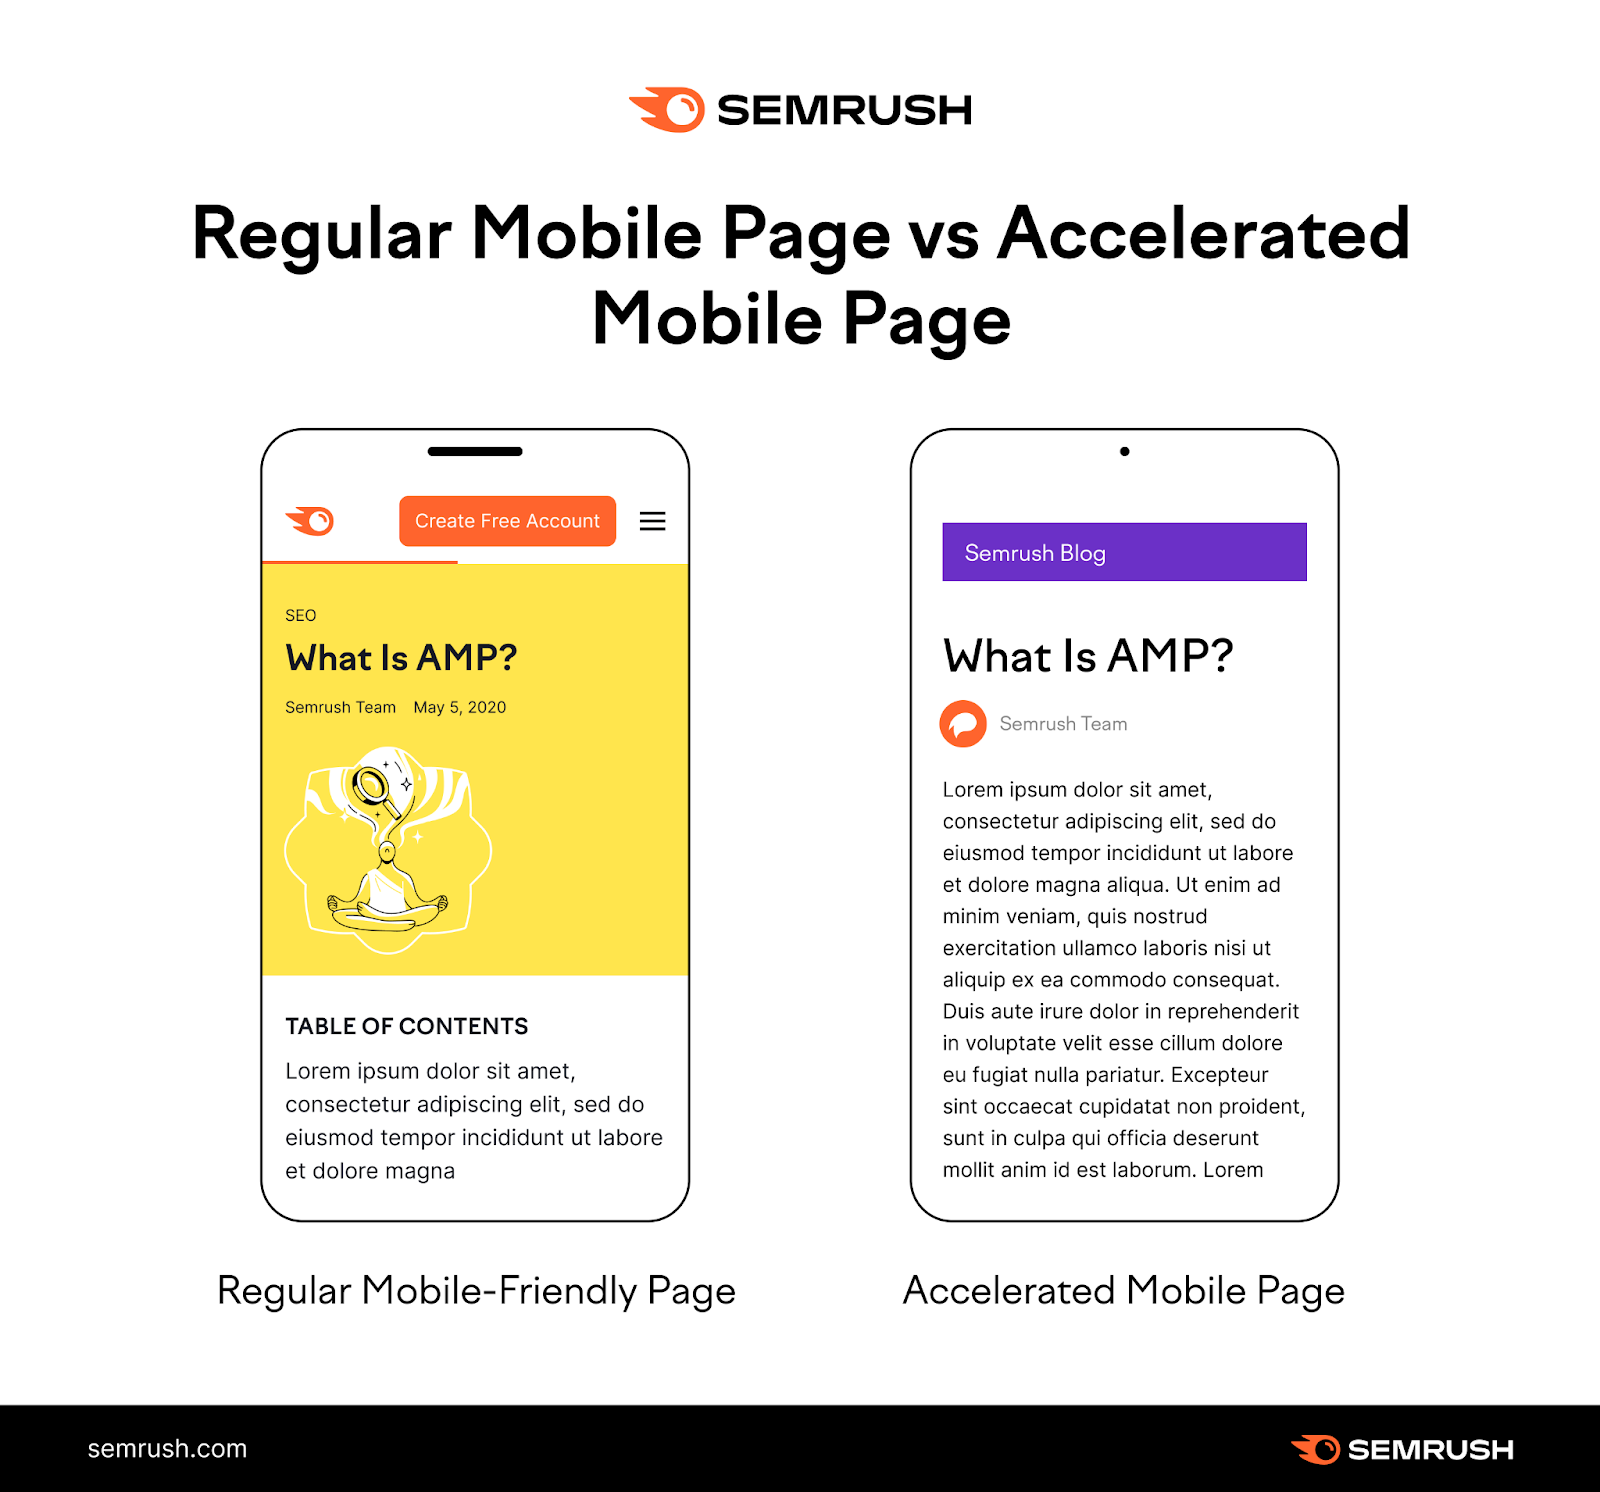 an image by Semrush showing "Regular Mobile Page vs Accelerated Mobile Page"